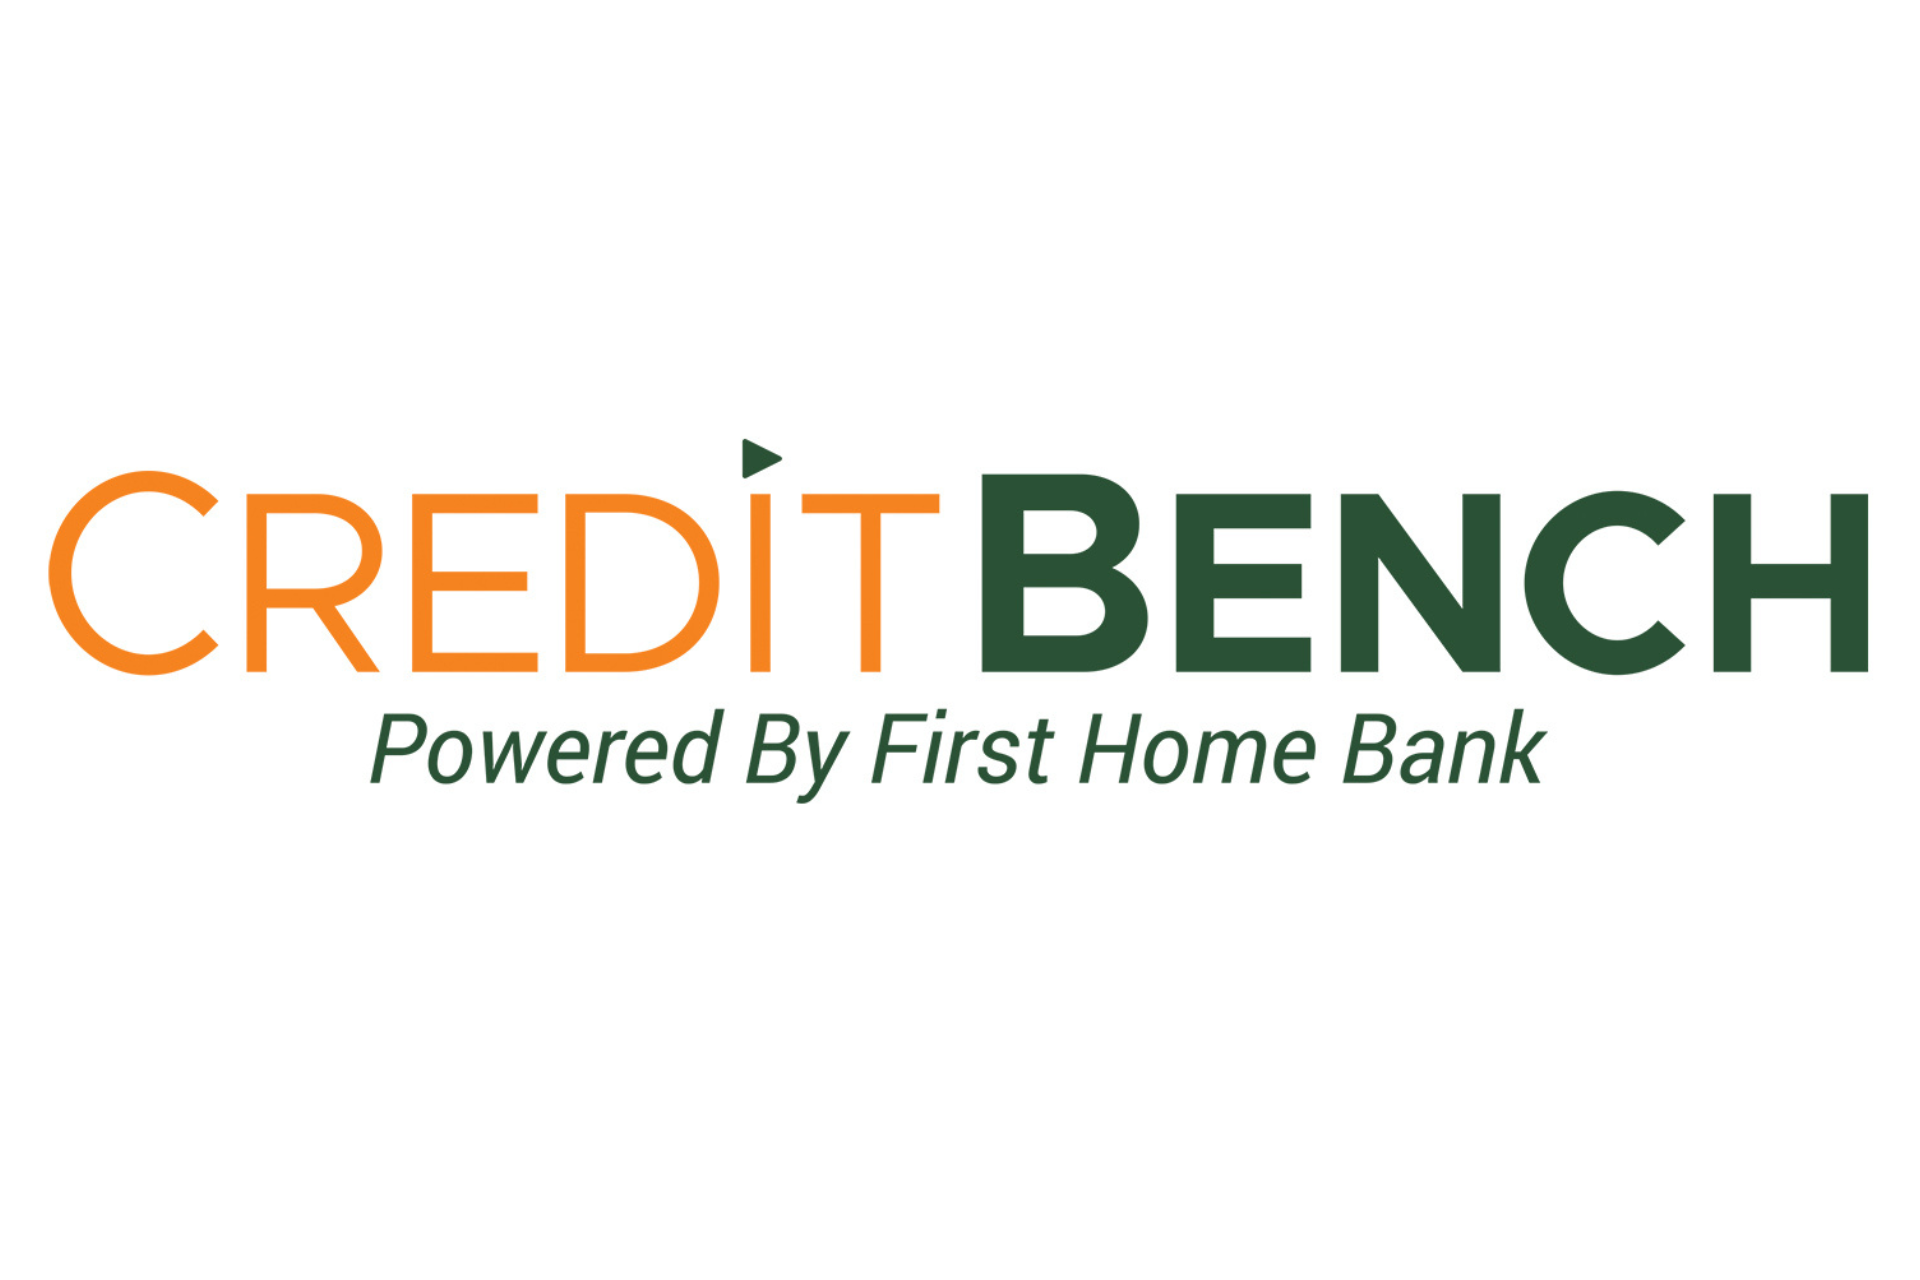 The credit bench logo is powered by first home bank.